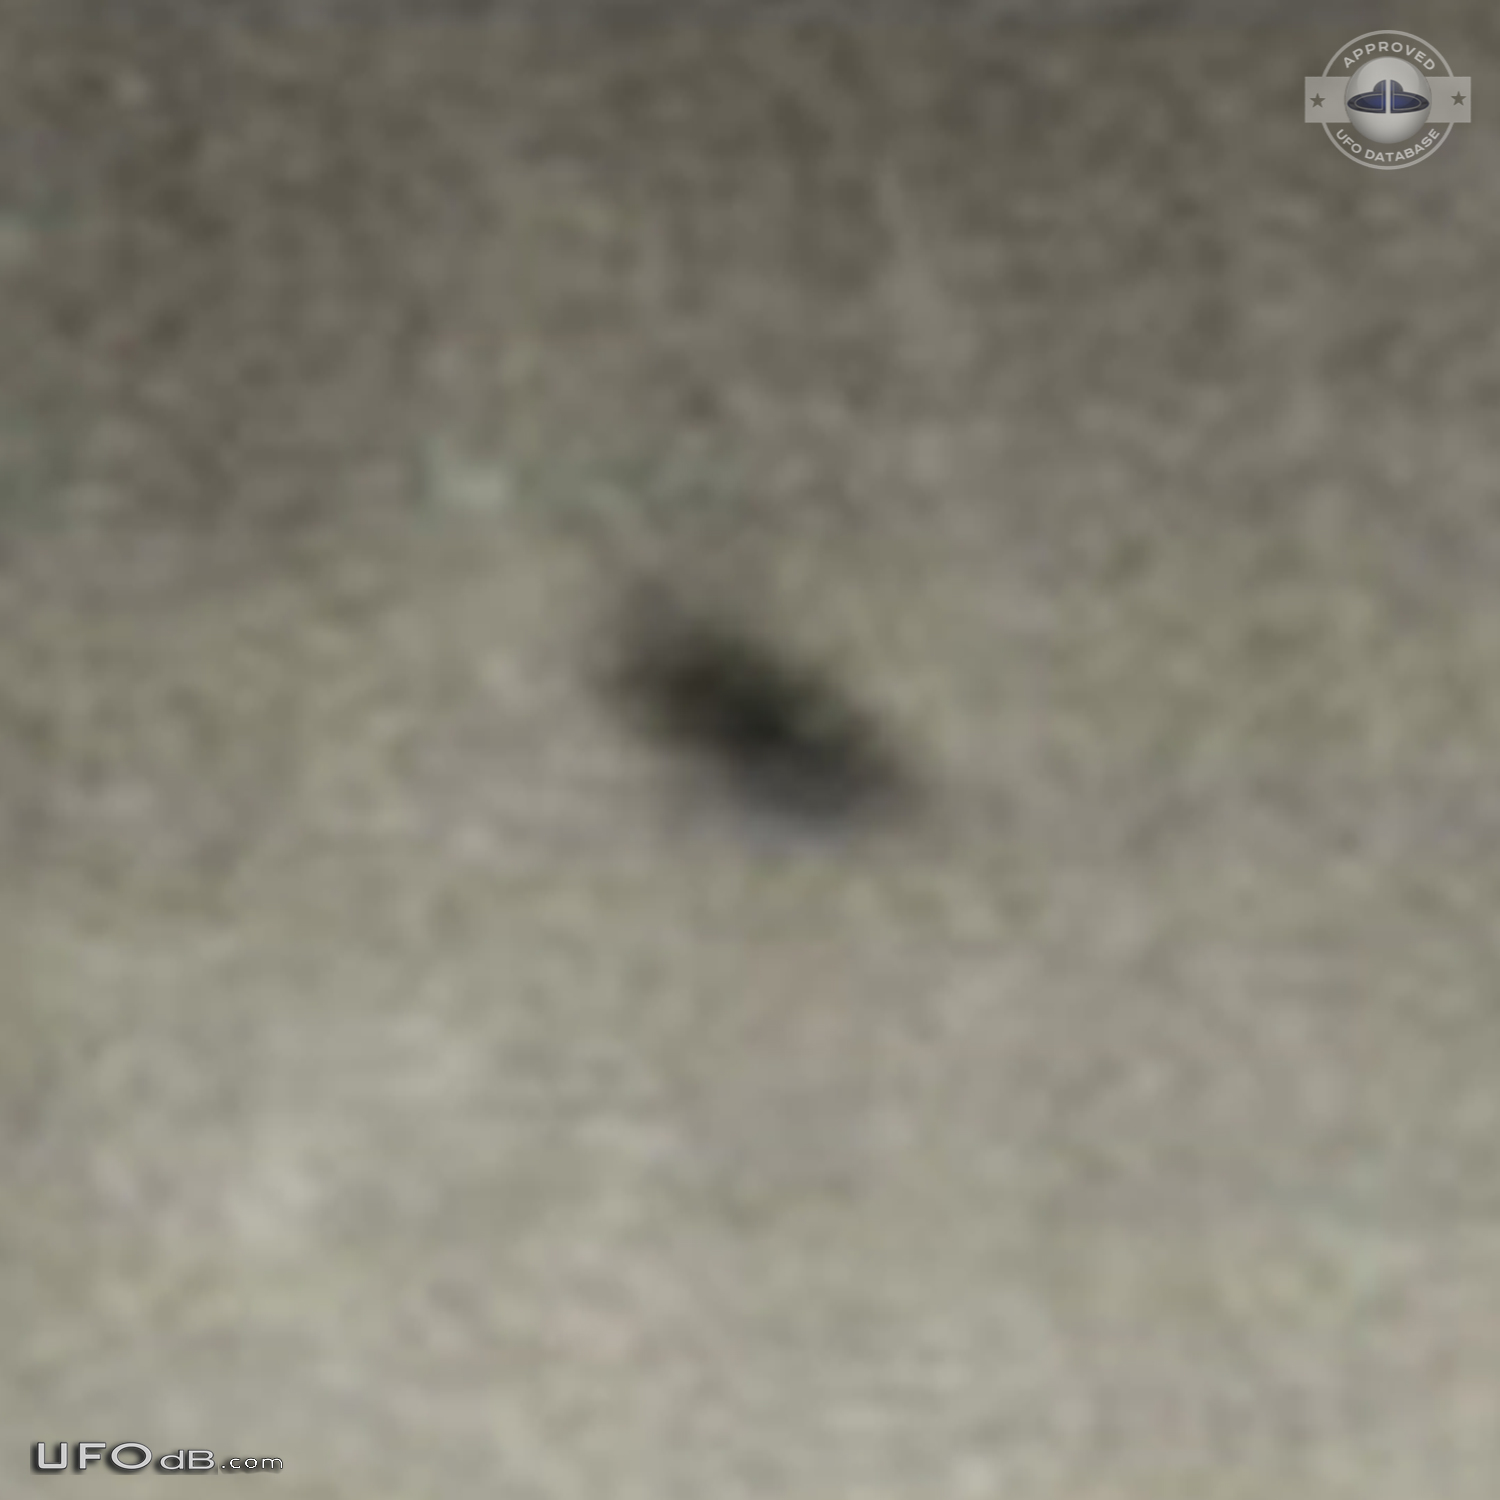 Flying saucer UFO in tourist picture on Easter island in 1986 UFO Picture #836-4